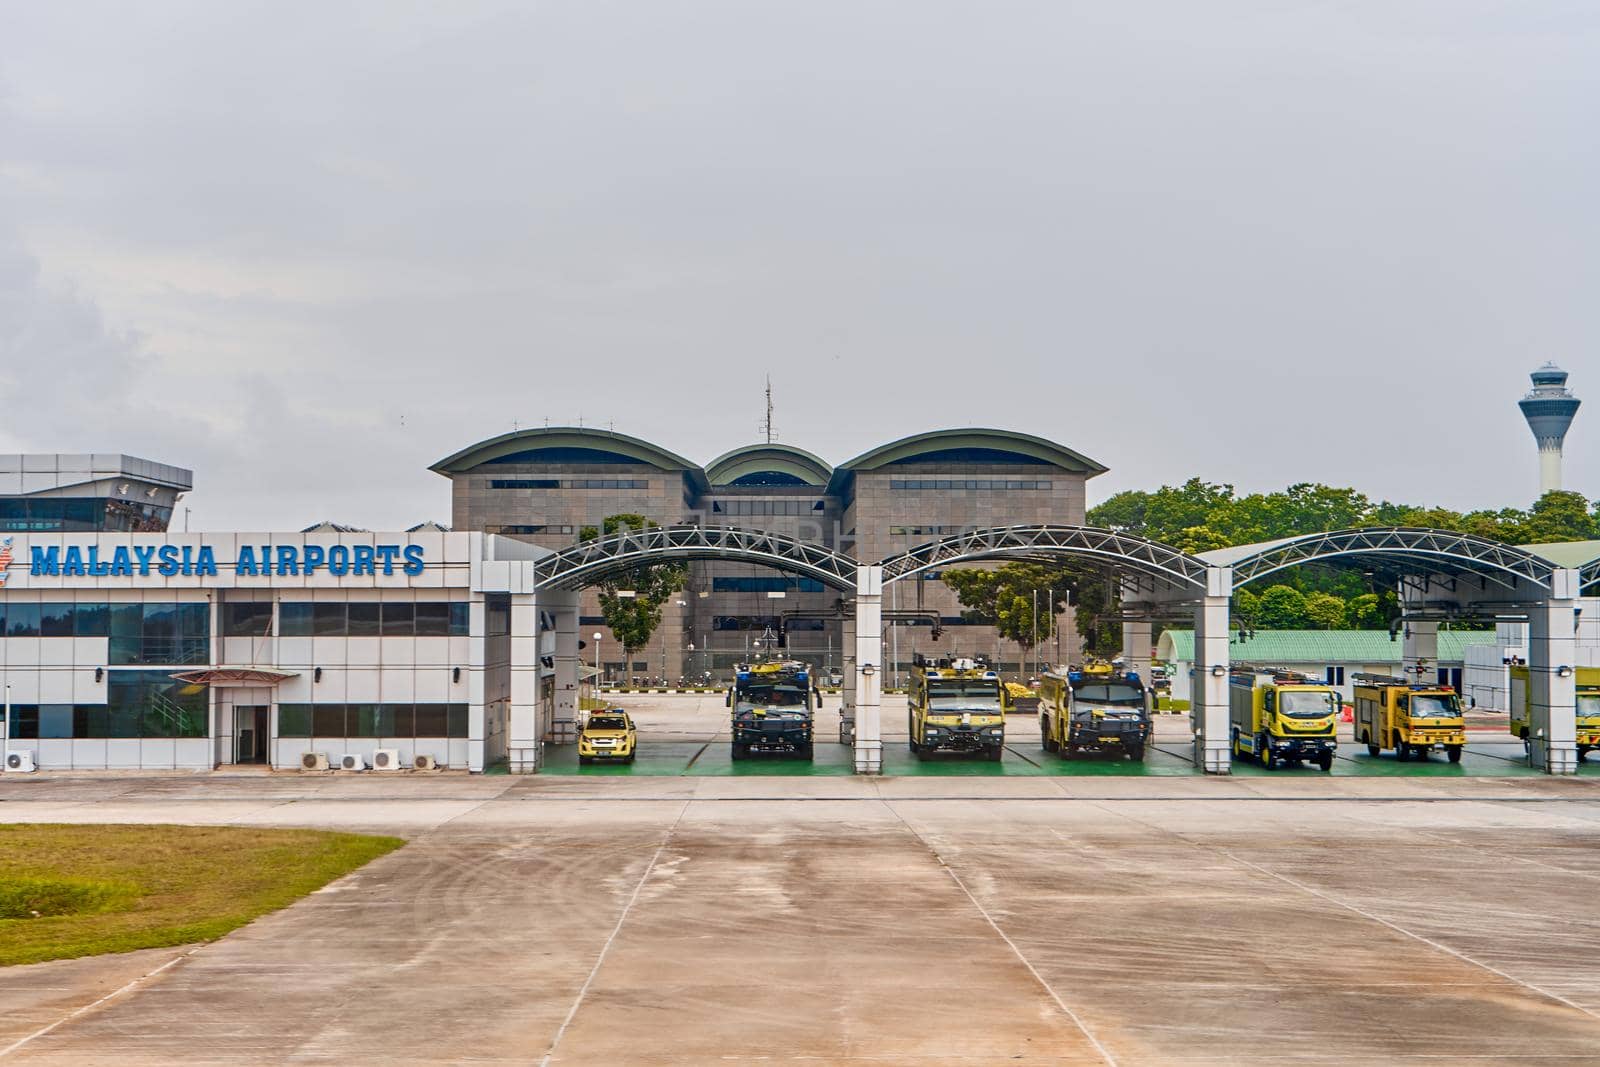 Fire department and emergency parking at the airport. Langkawi, Malaysia - 06.20.2020